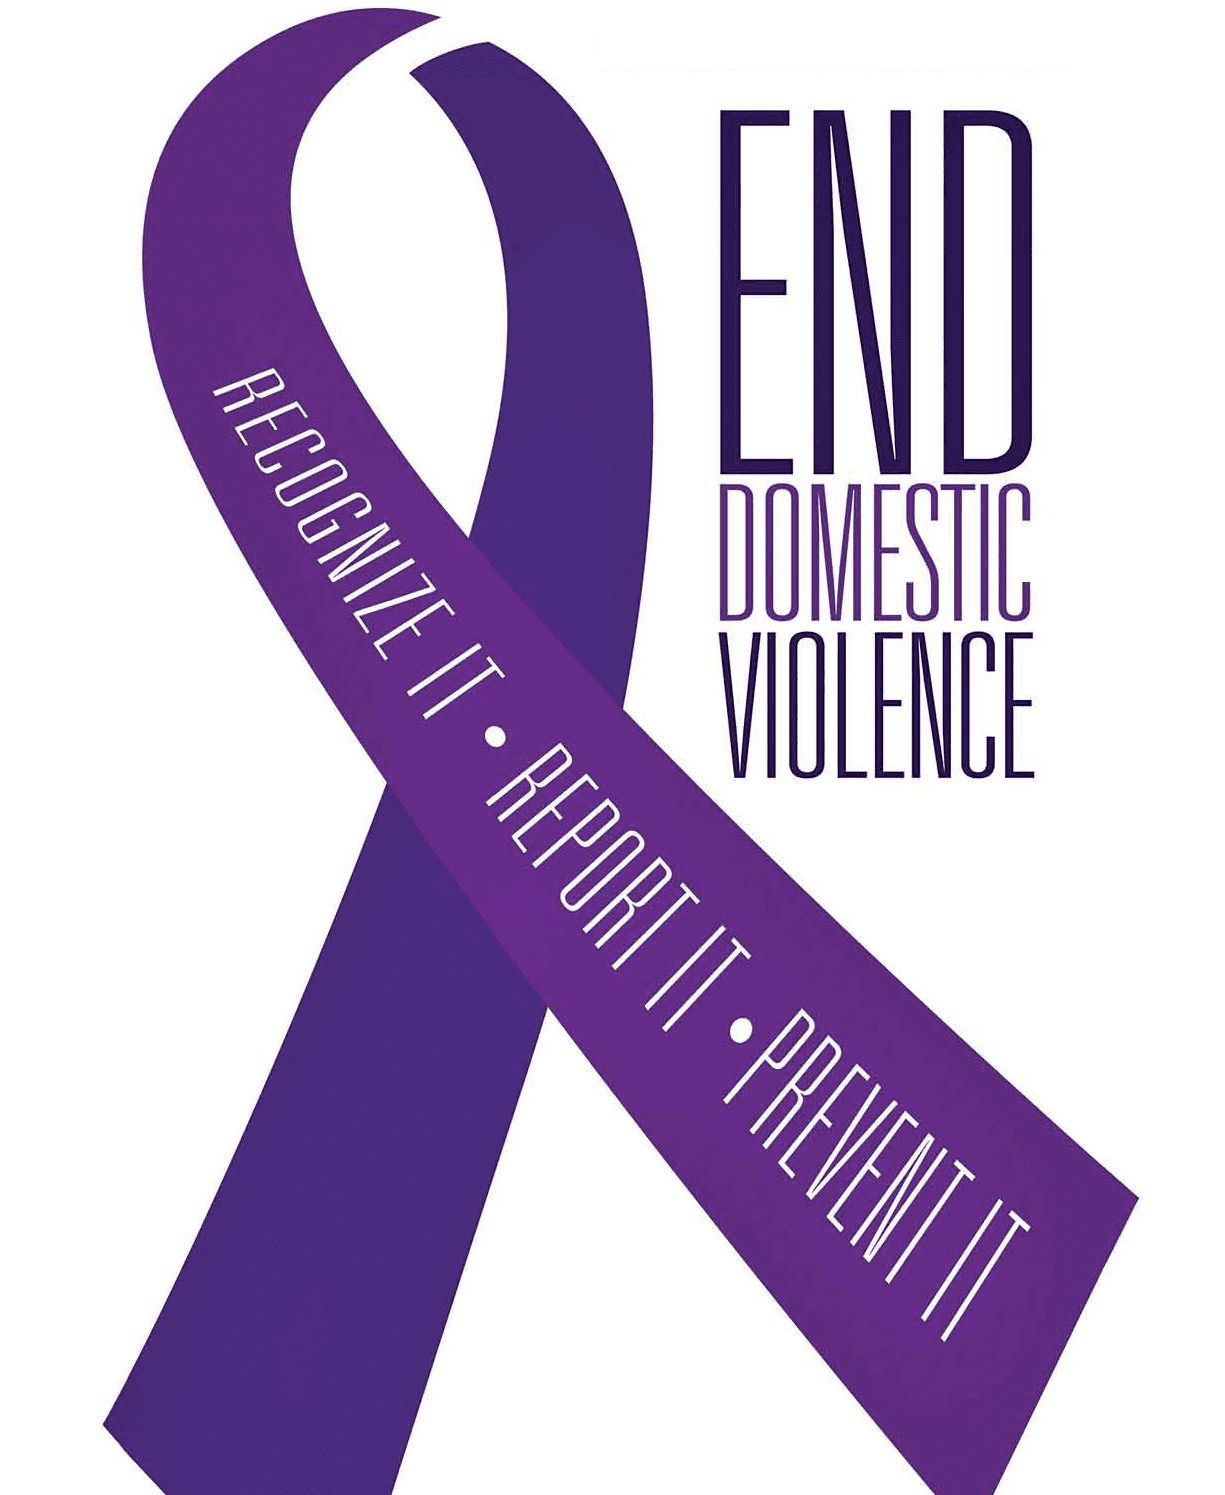 Domestic Violence- It Affects Everyone